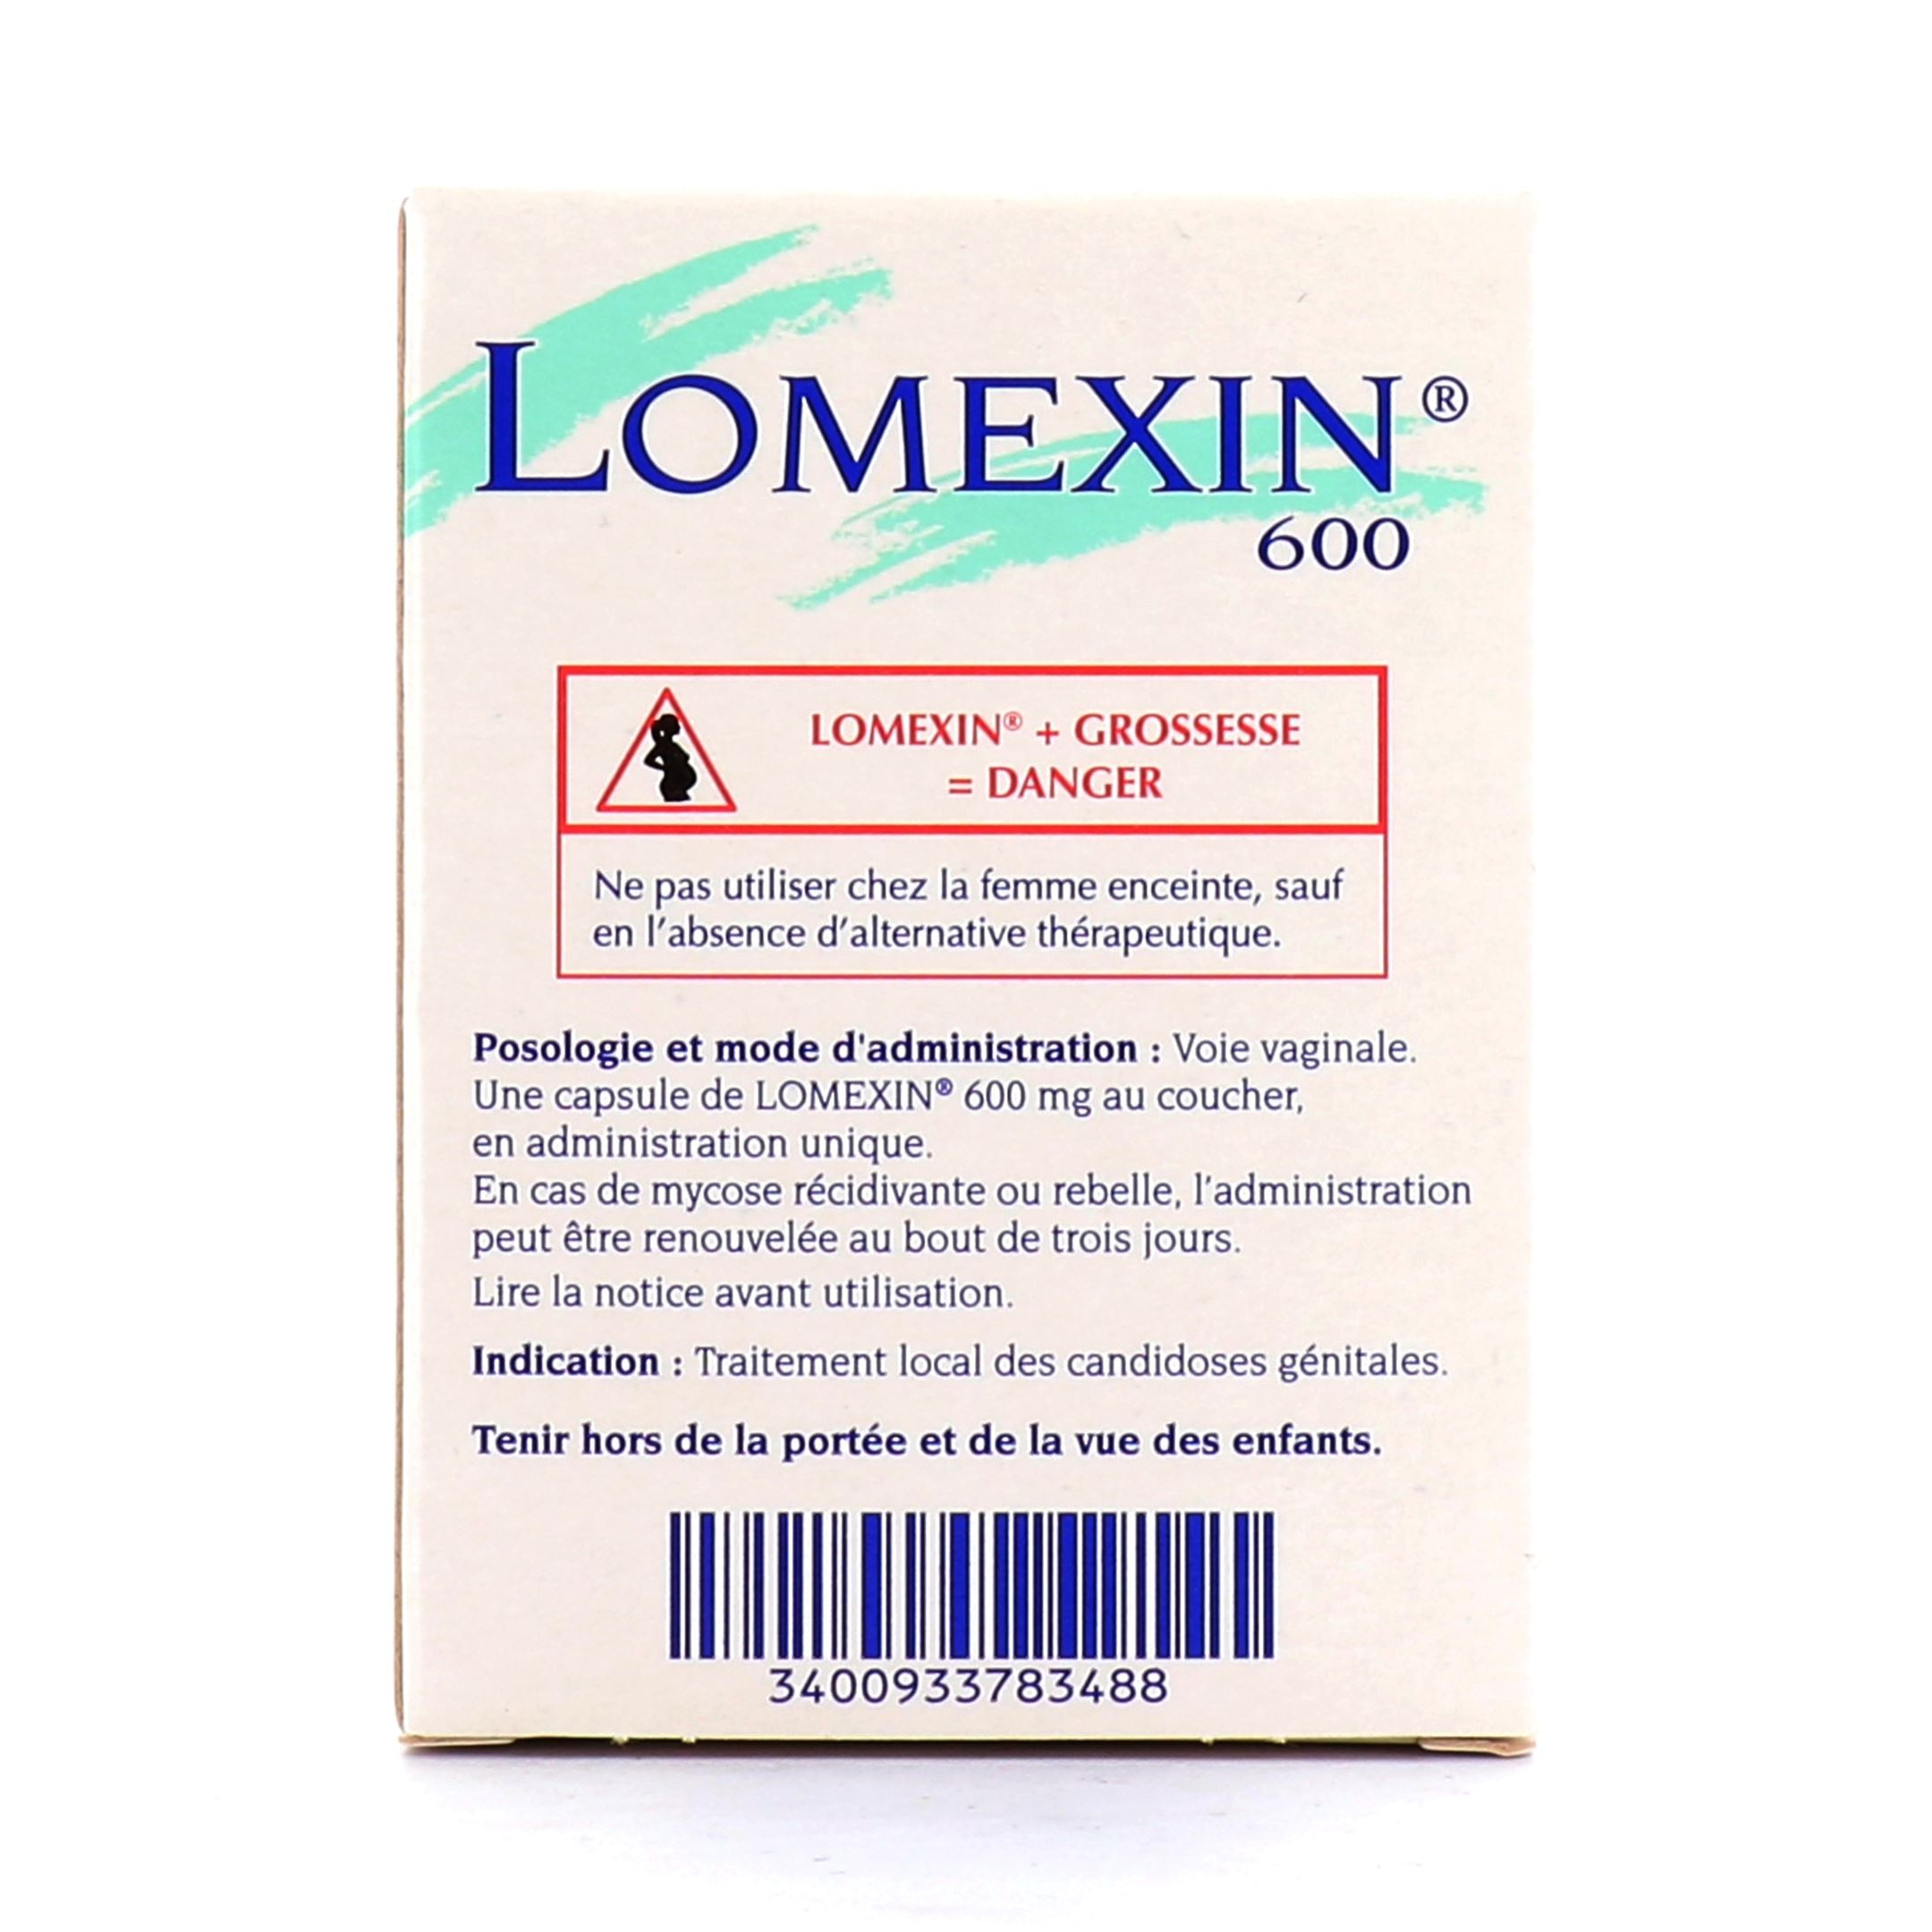 lomexin 600mg capsule vaginale